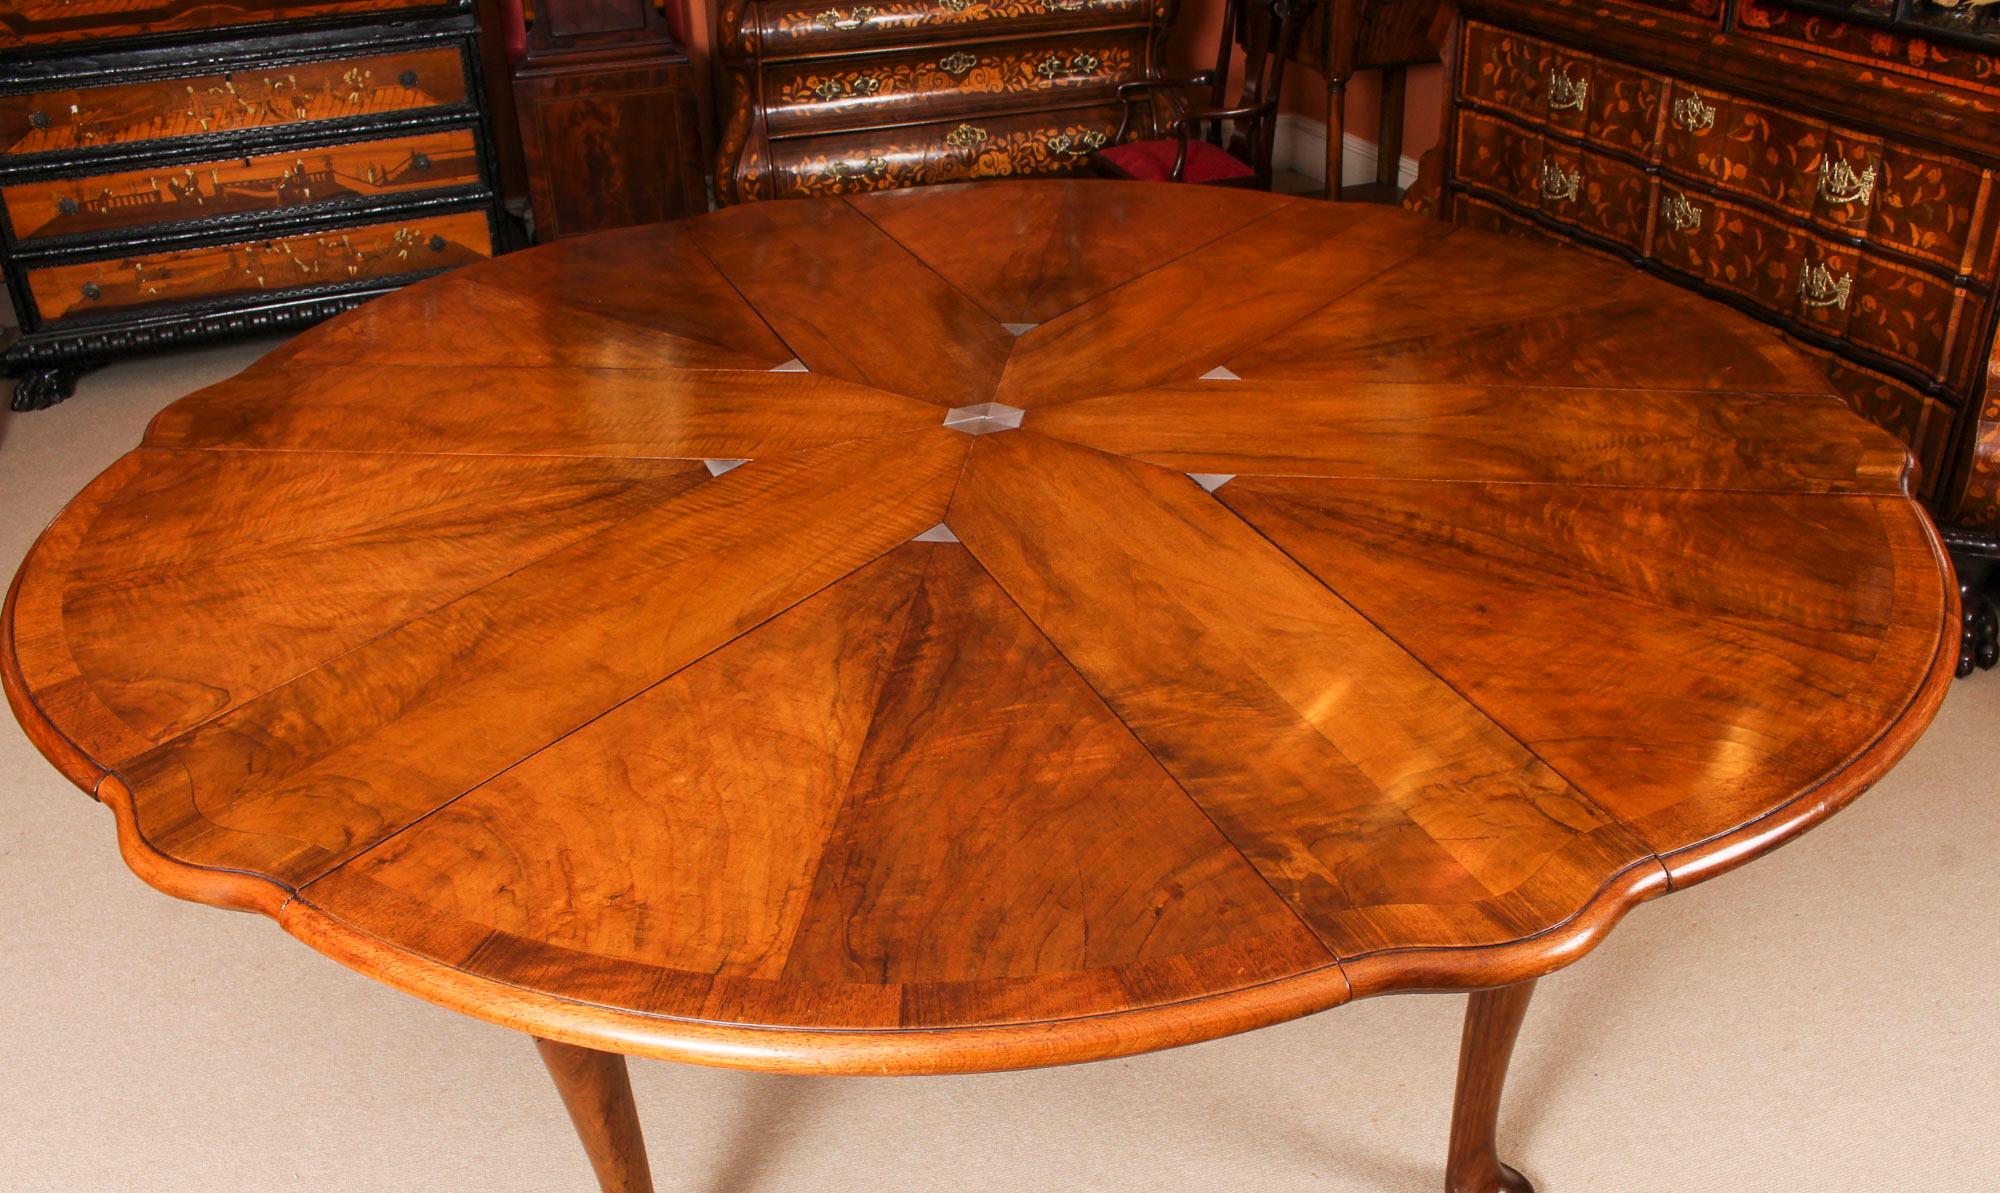 Queen Anne Antique Walnut Jupe Action Dining Table by Gillows & 8 Chairs Late 19th Century